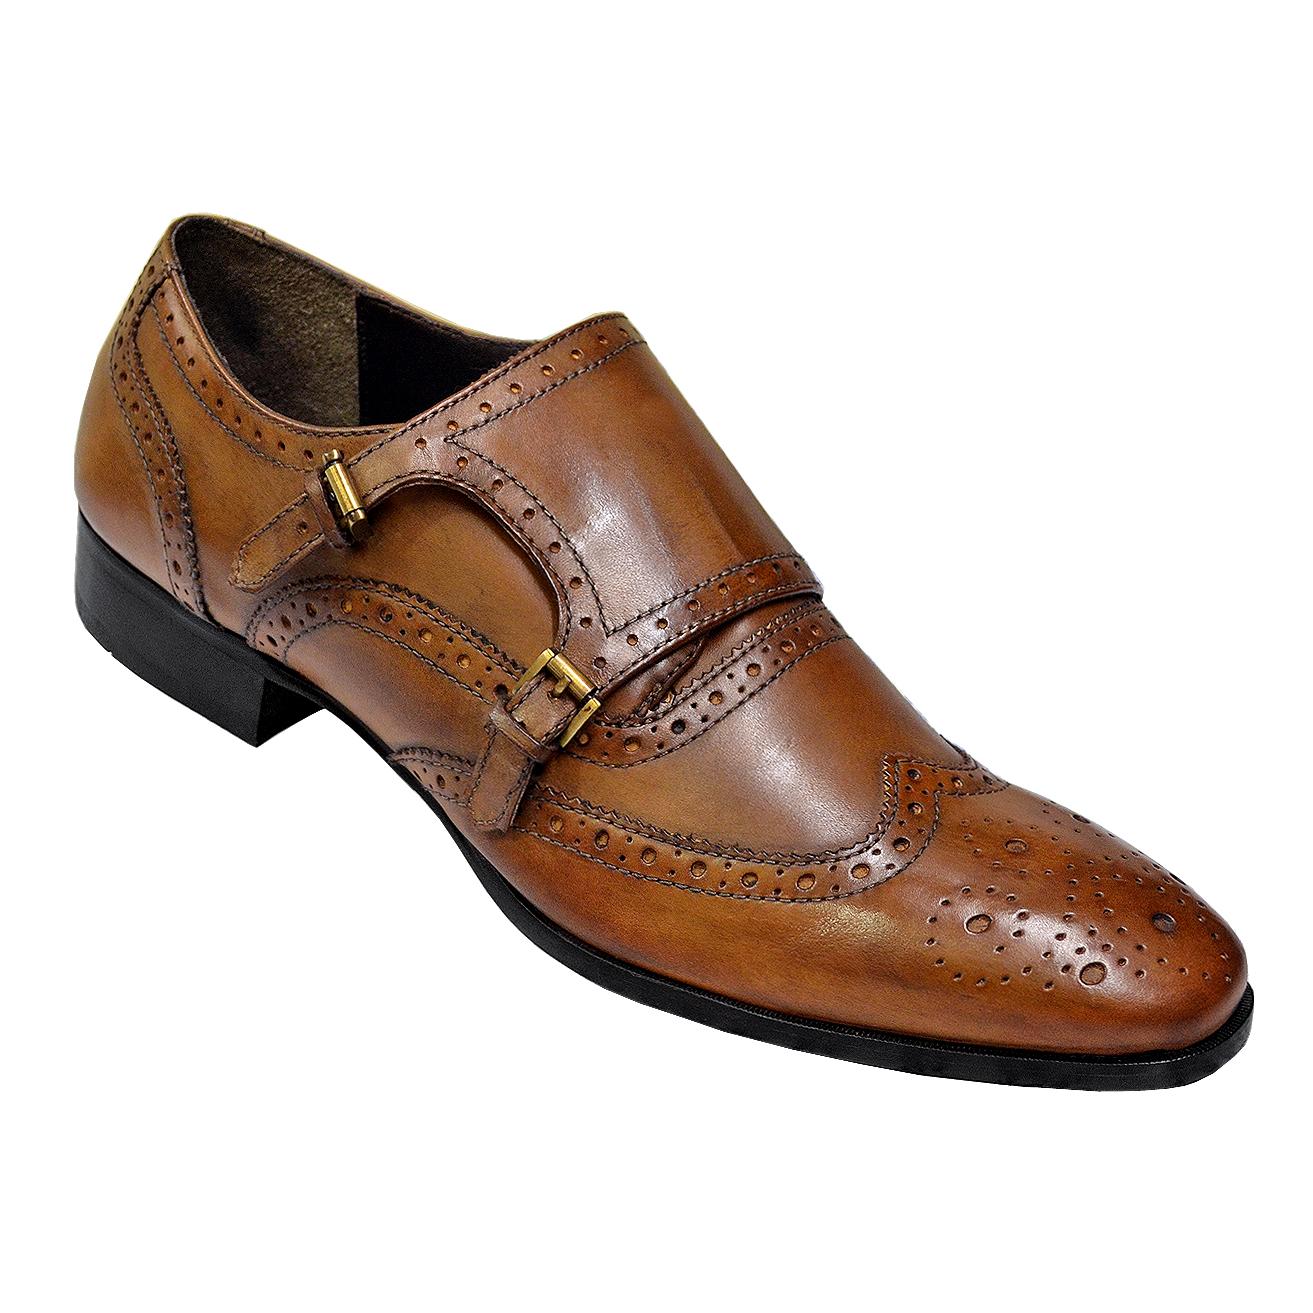 Tan burnished all leather luxury lace up dress shoe for men. With